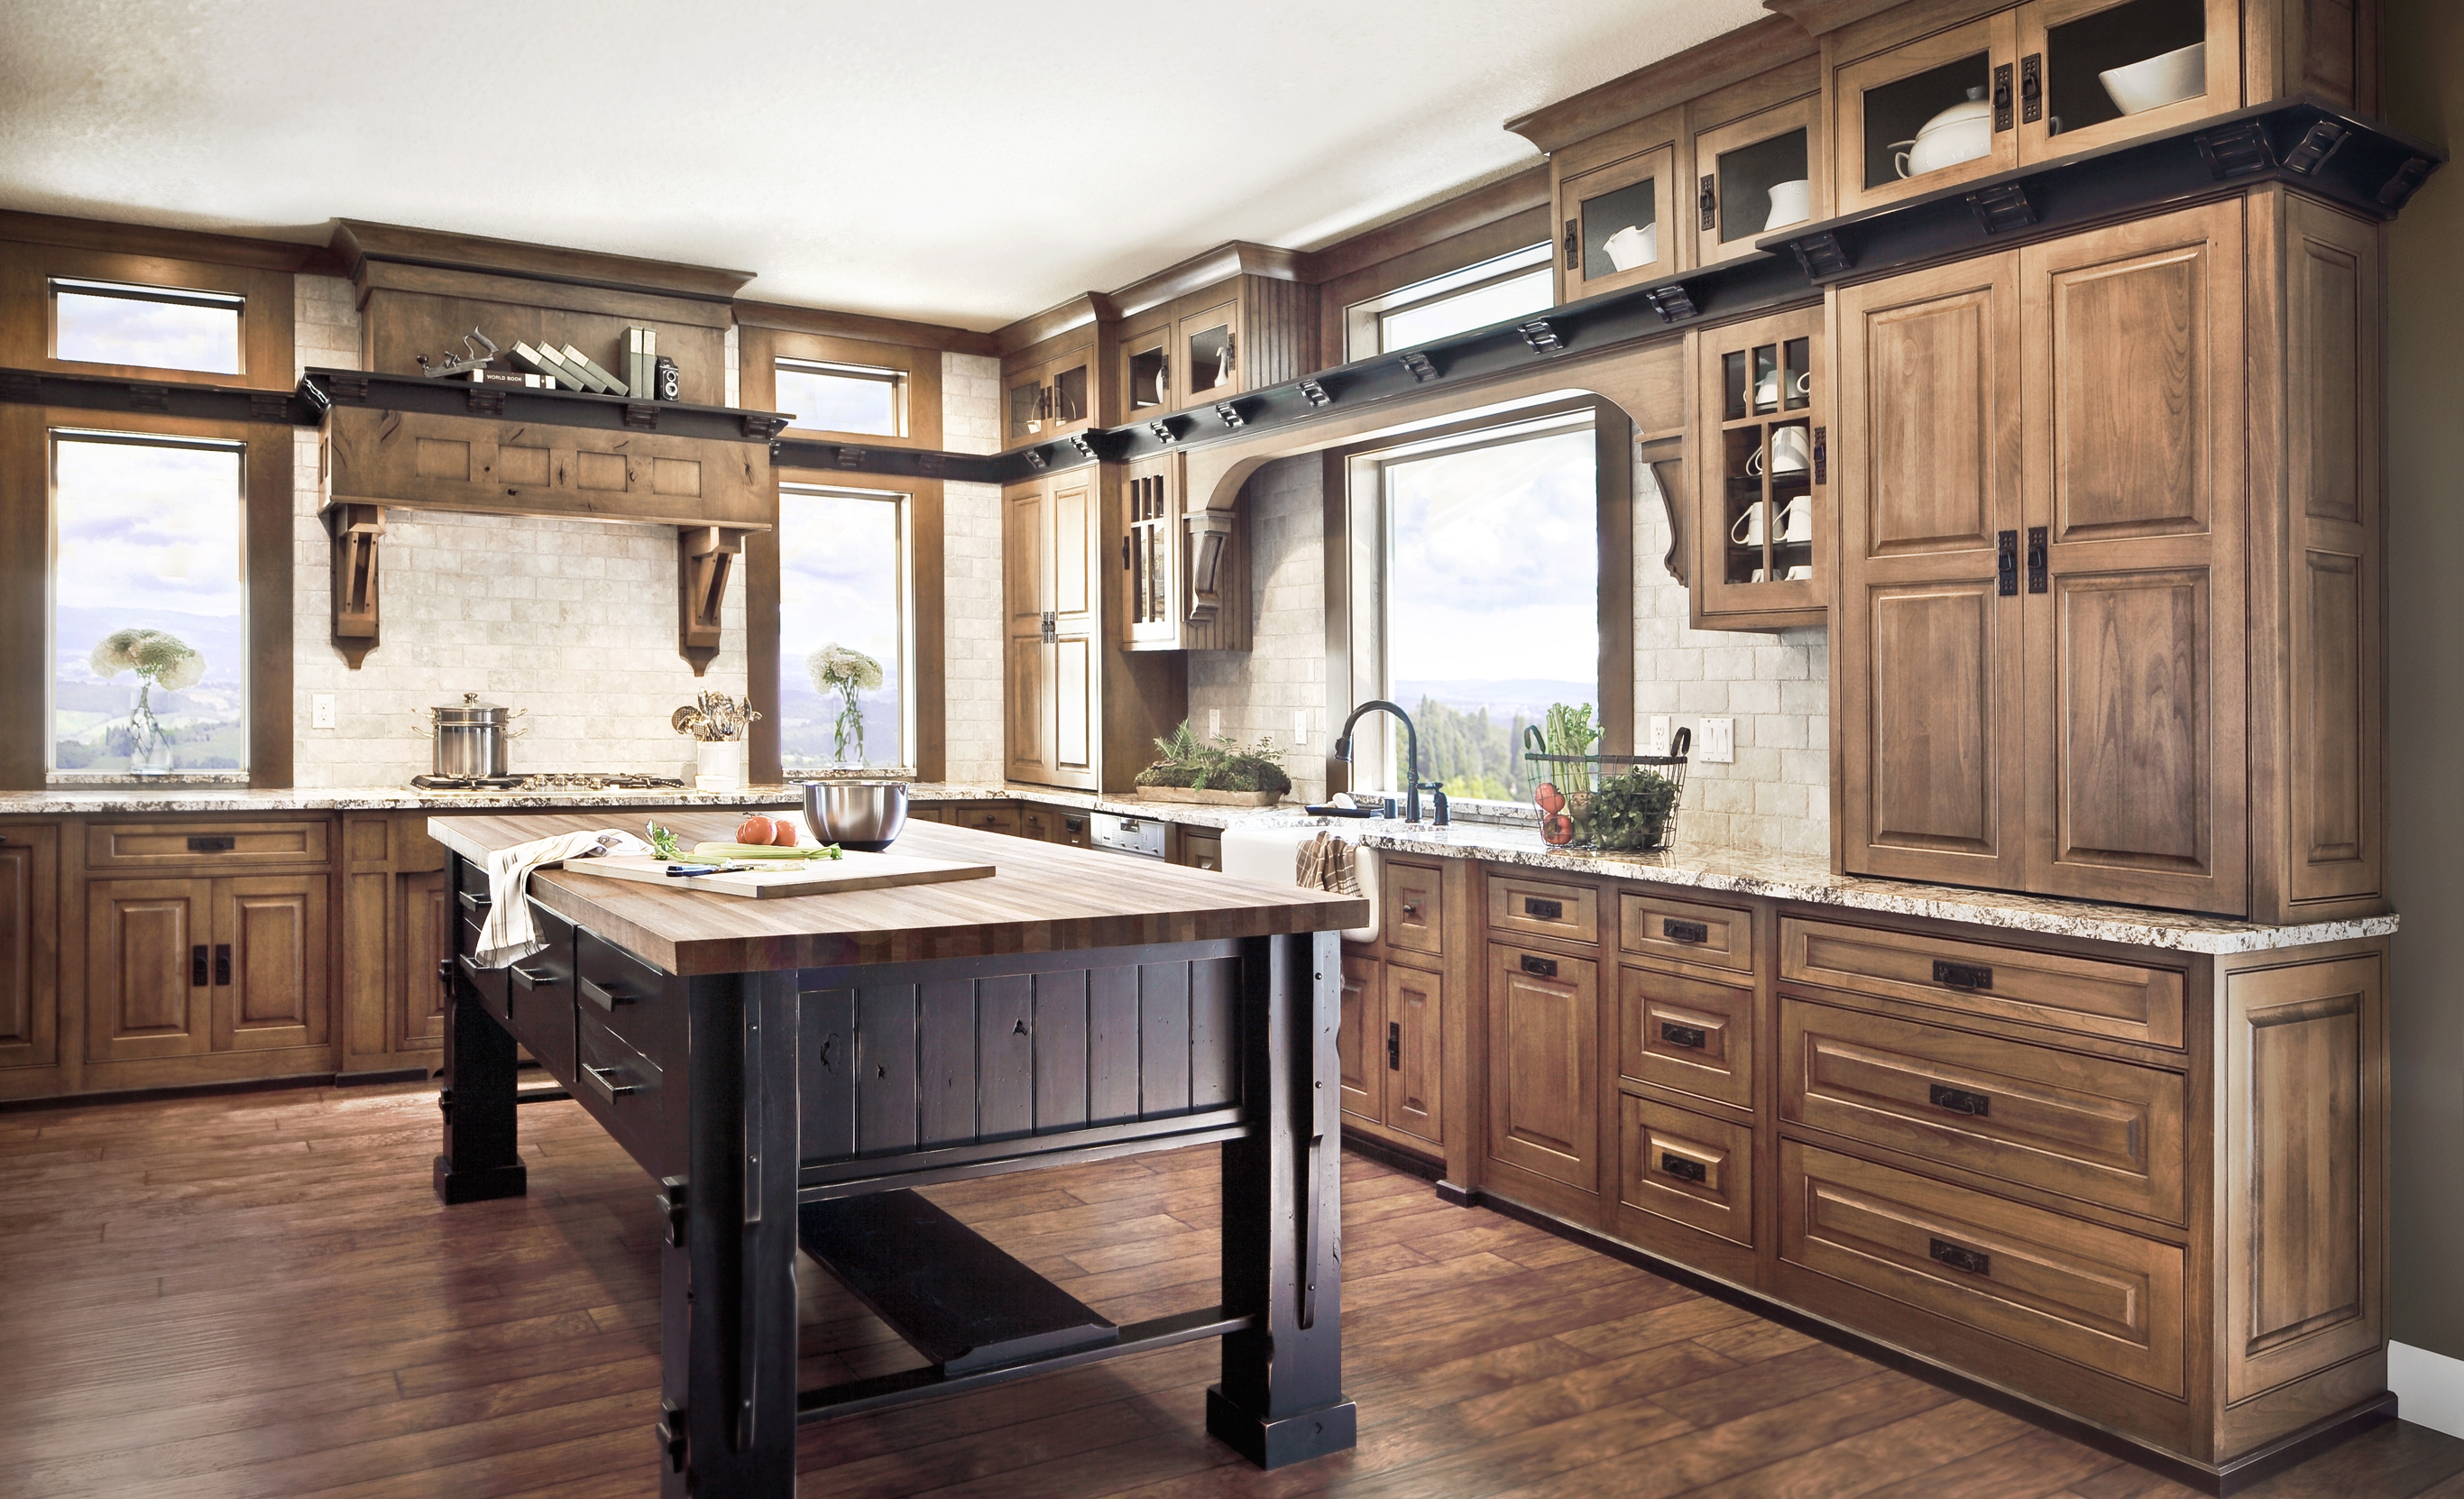 8 Images Knotty Alder Kitchen Pictures And View